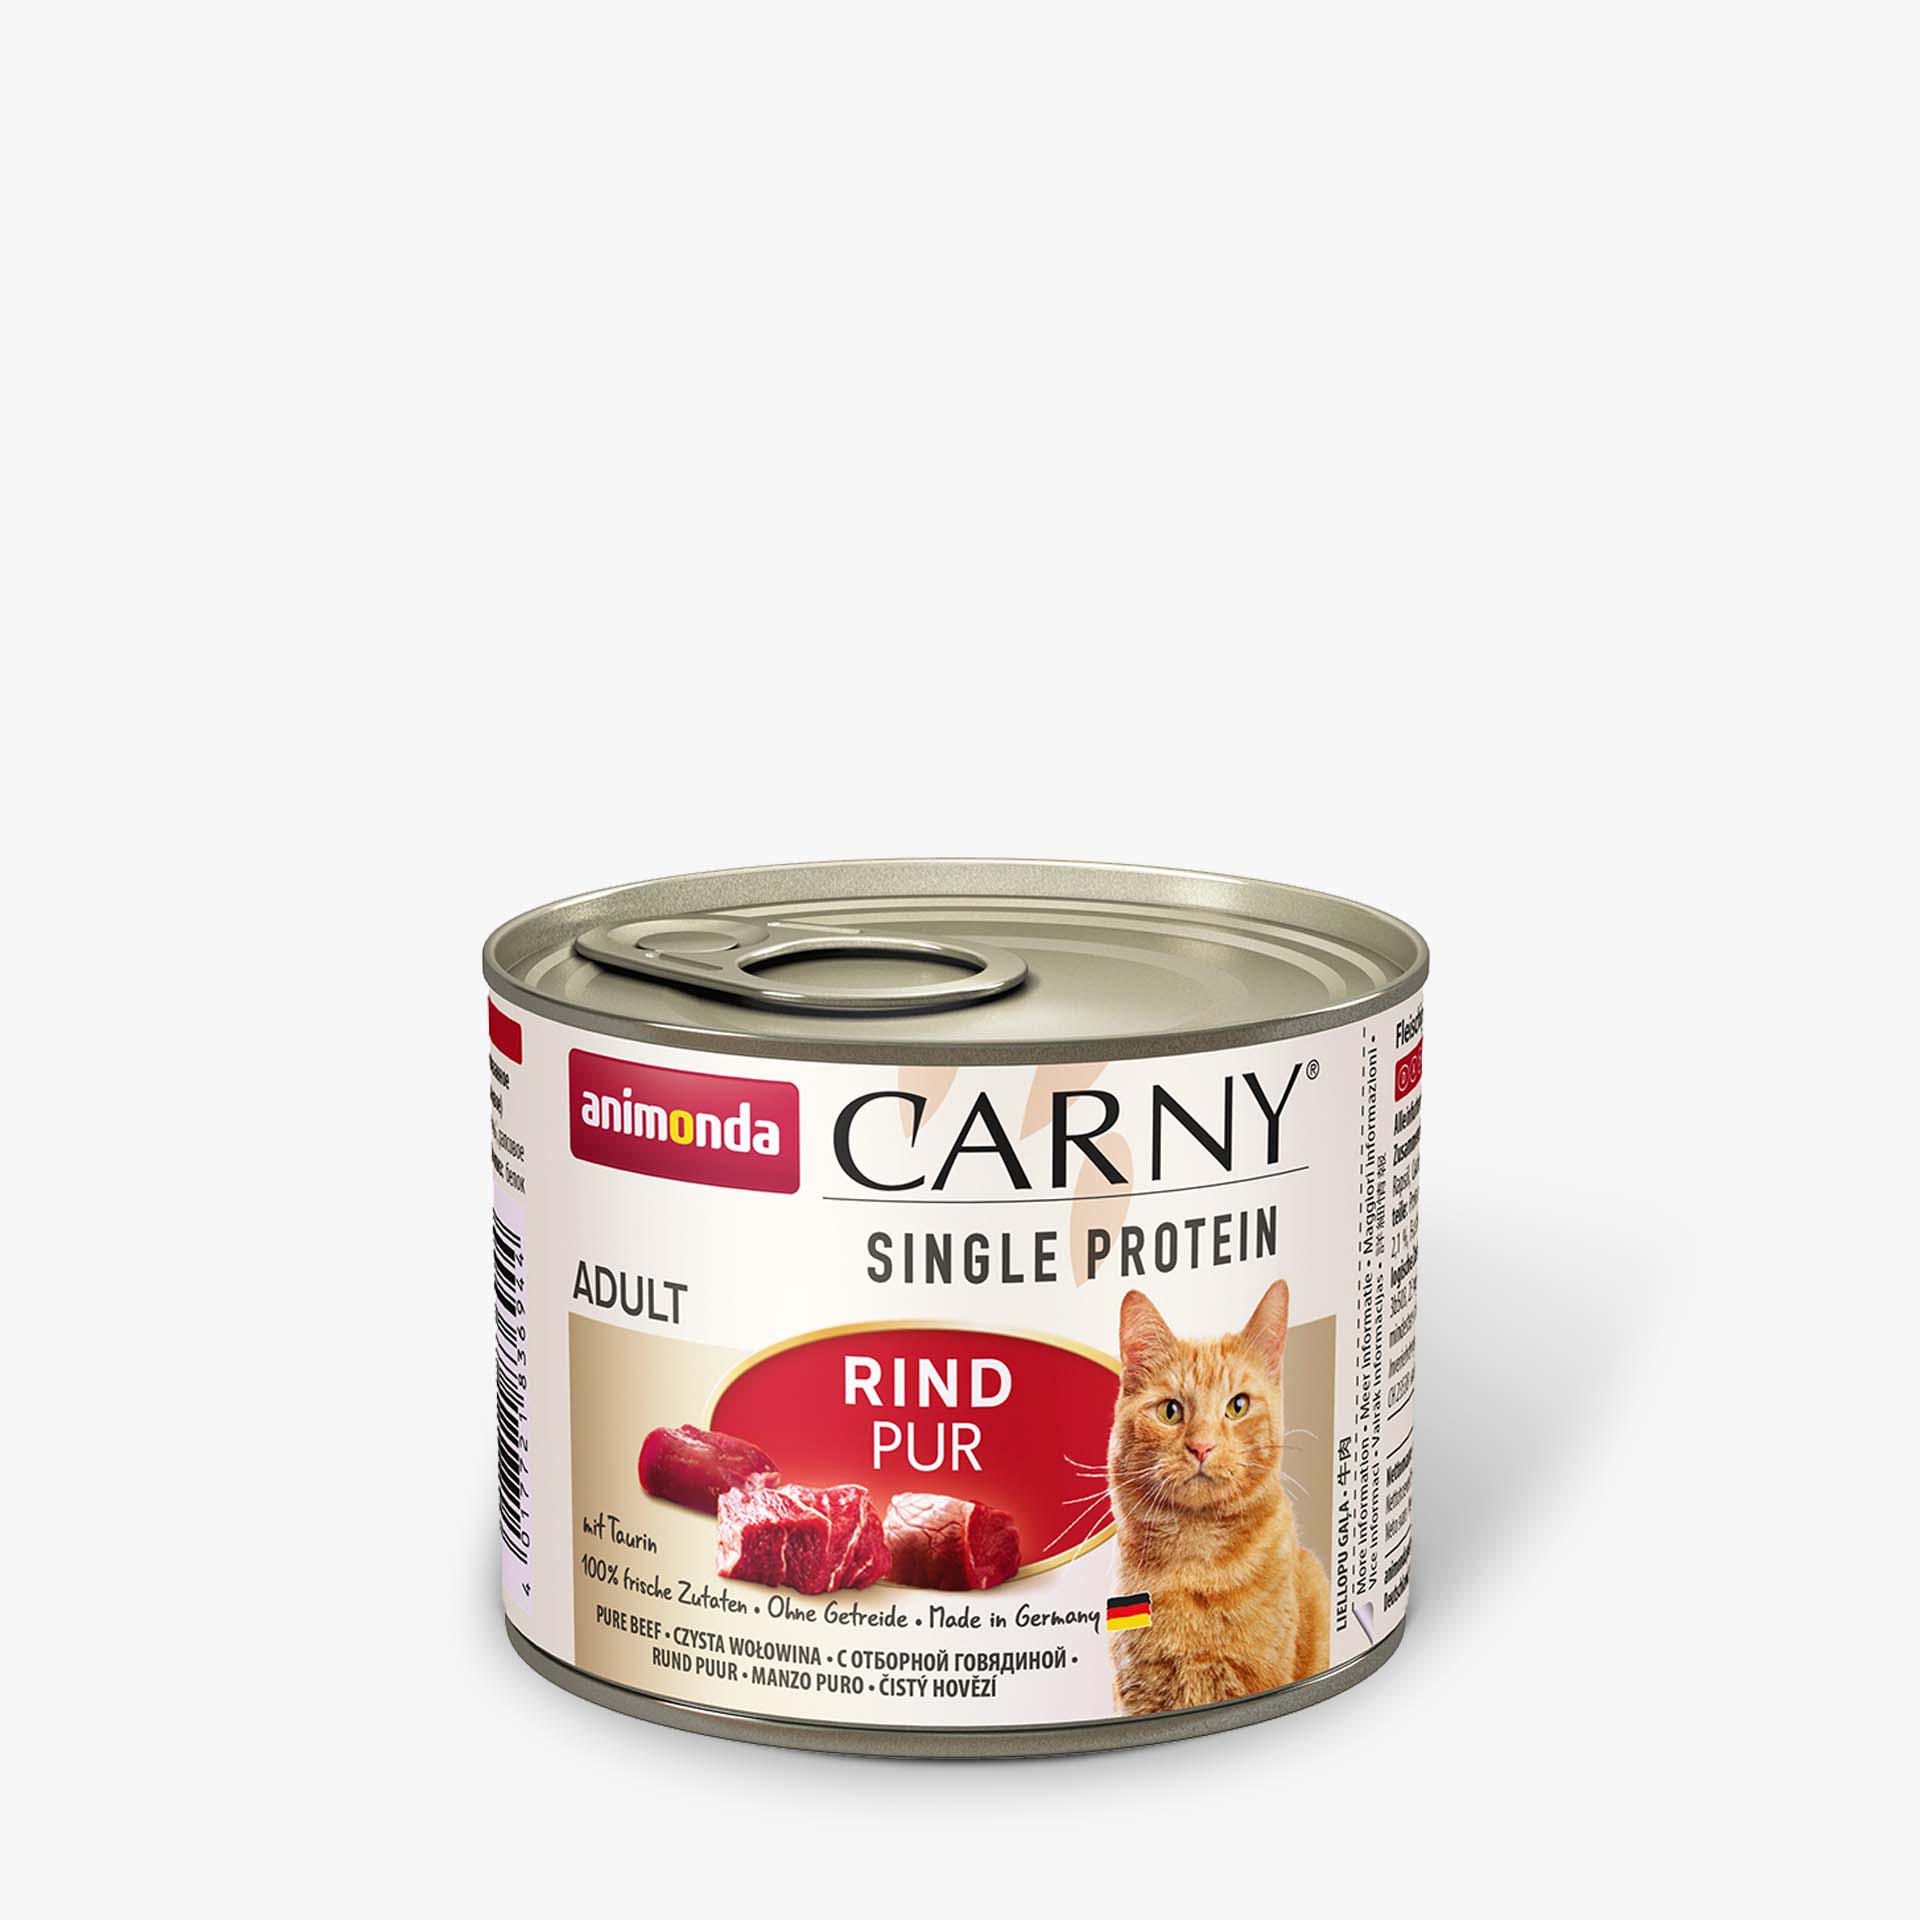 Carny Adult Single Protein Rind pur